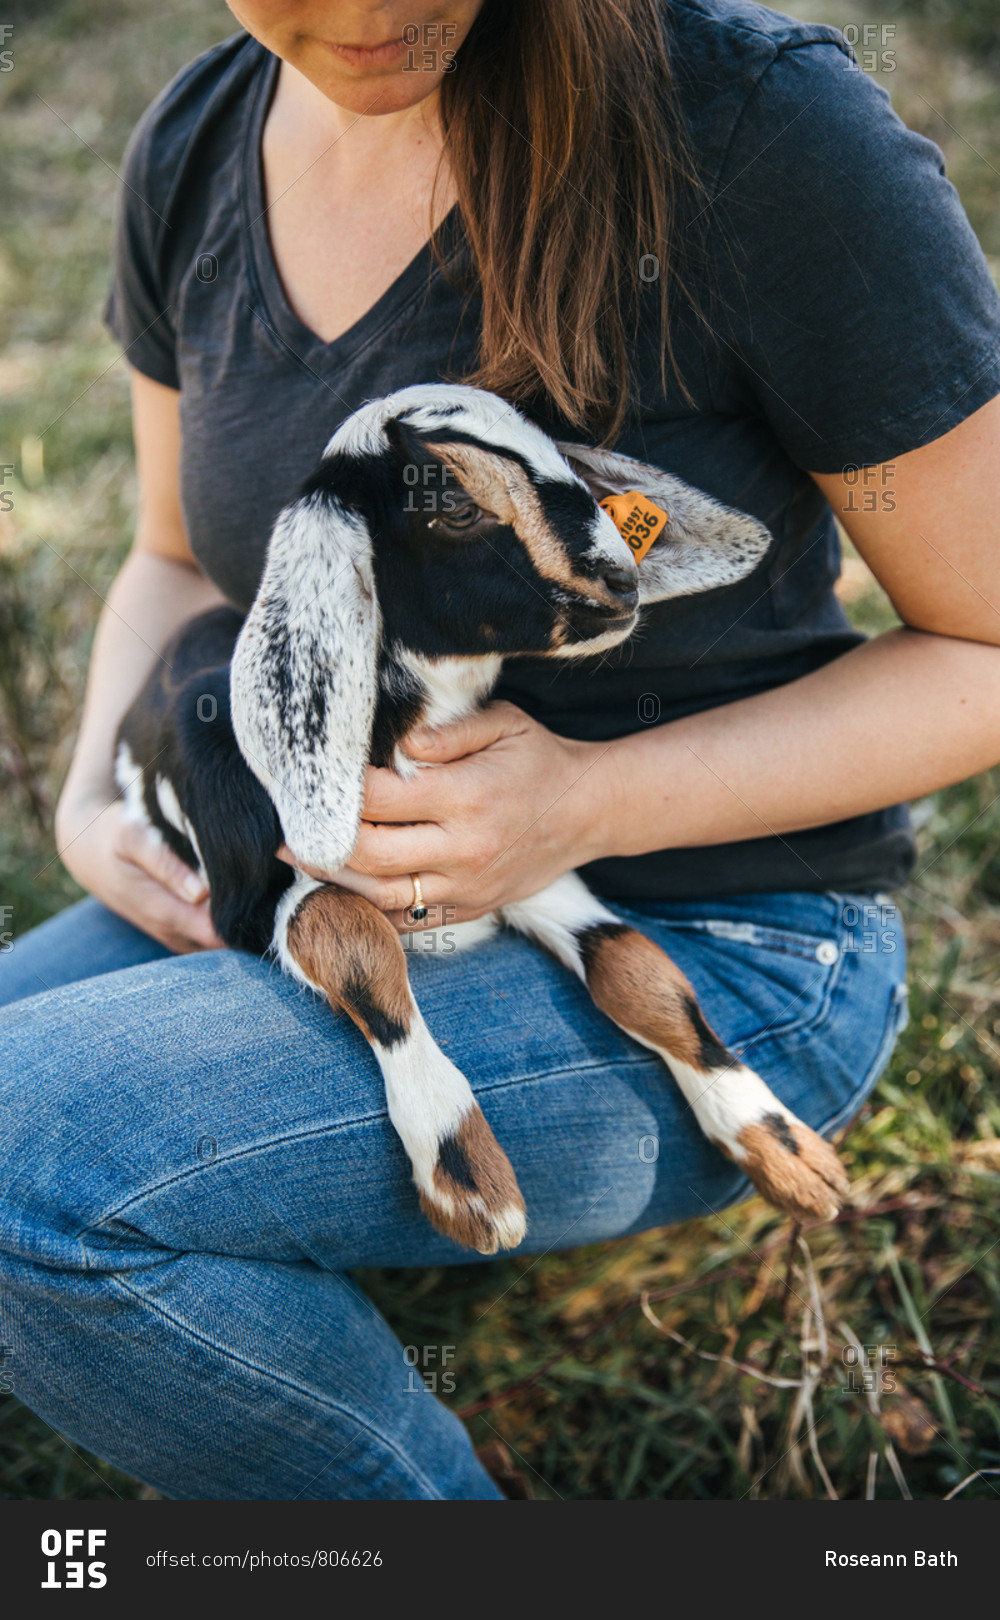 Woman holding a baby goat on her lap.